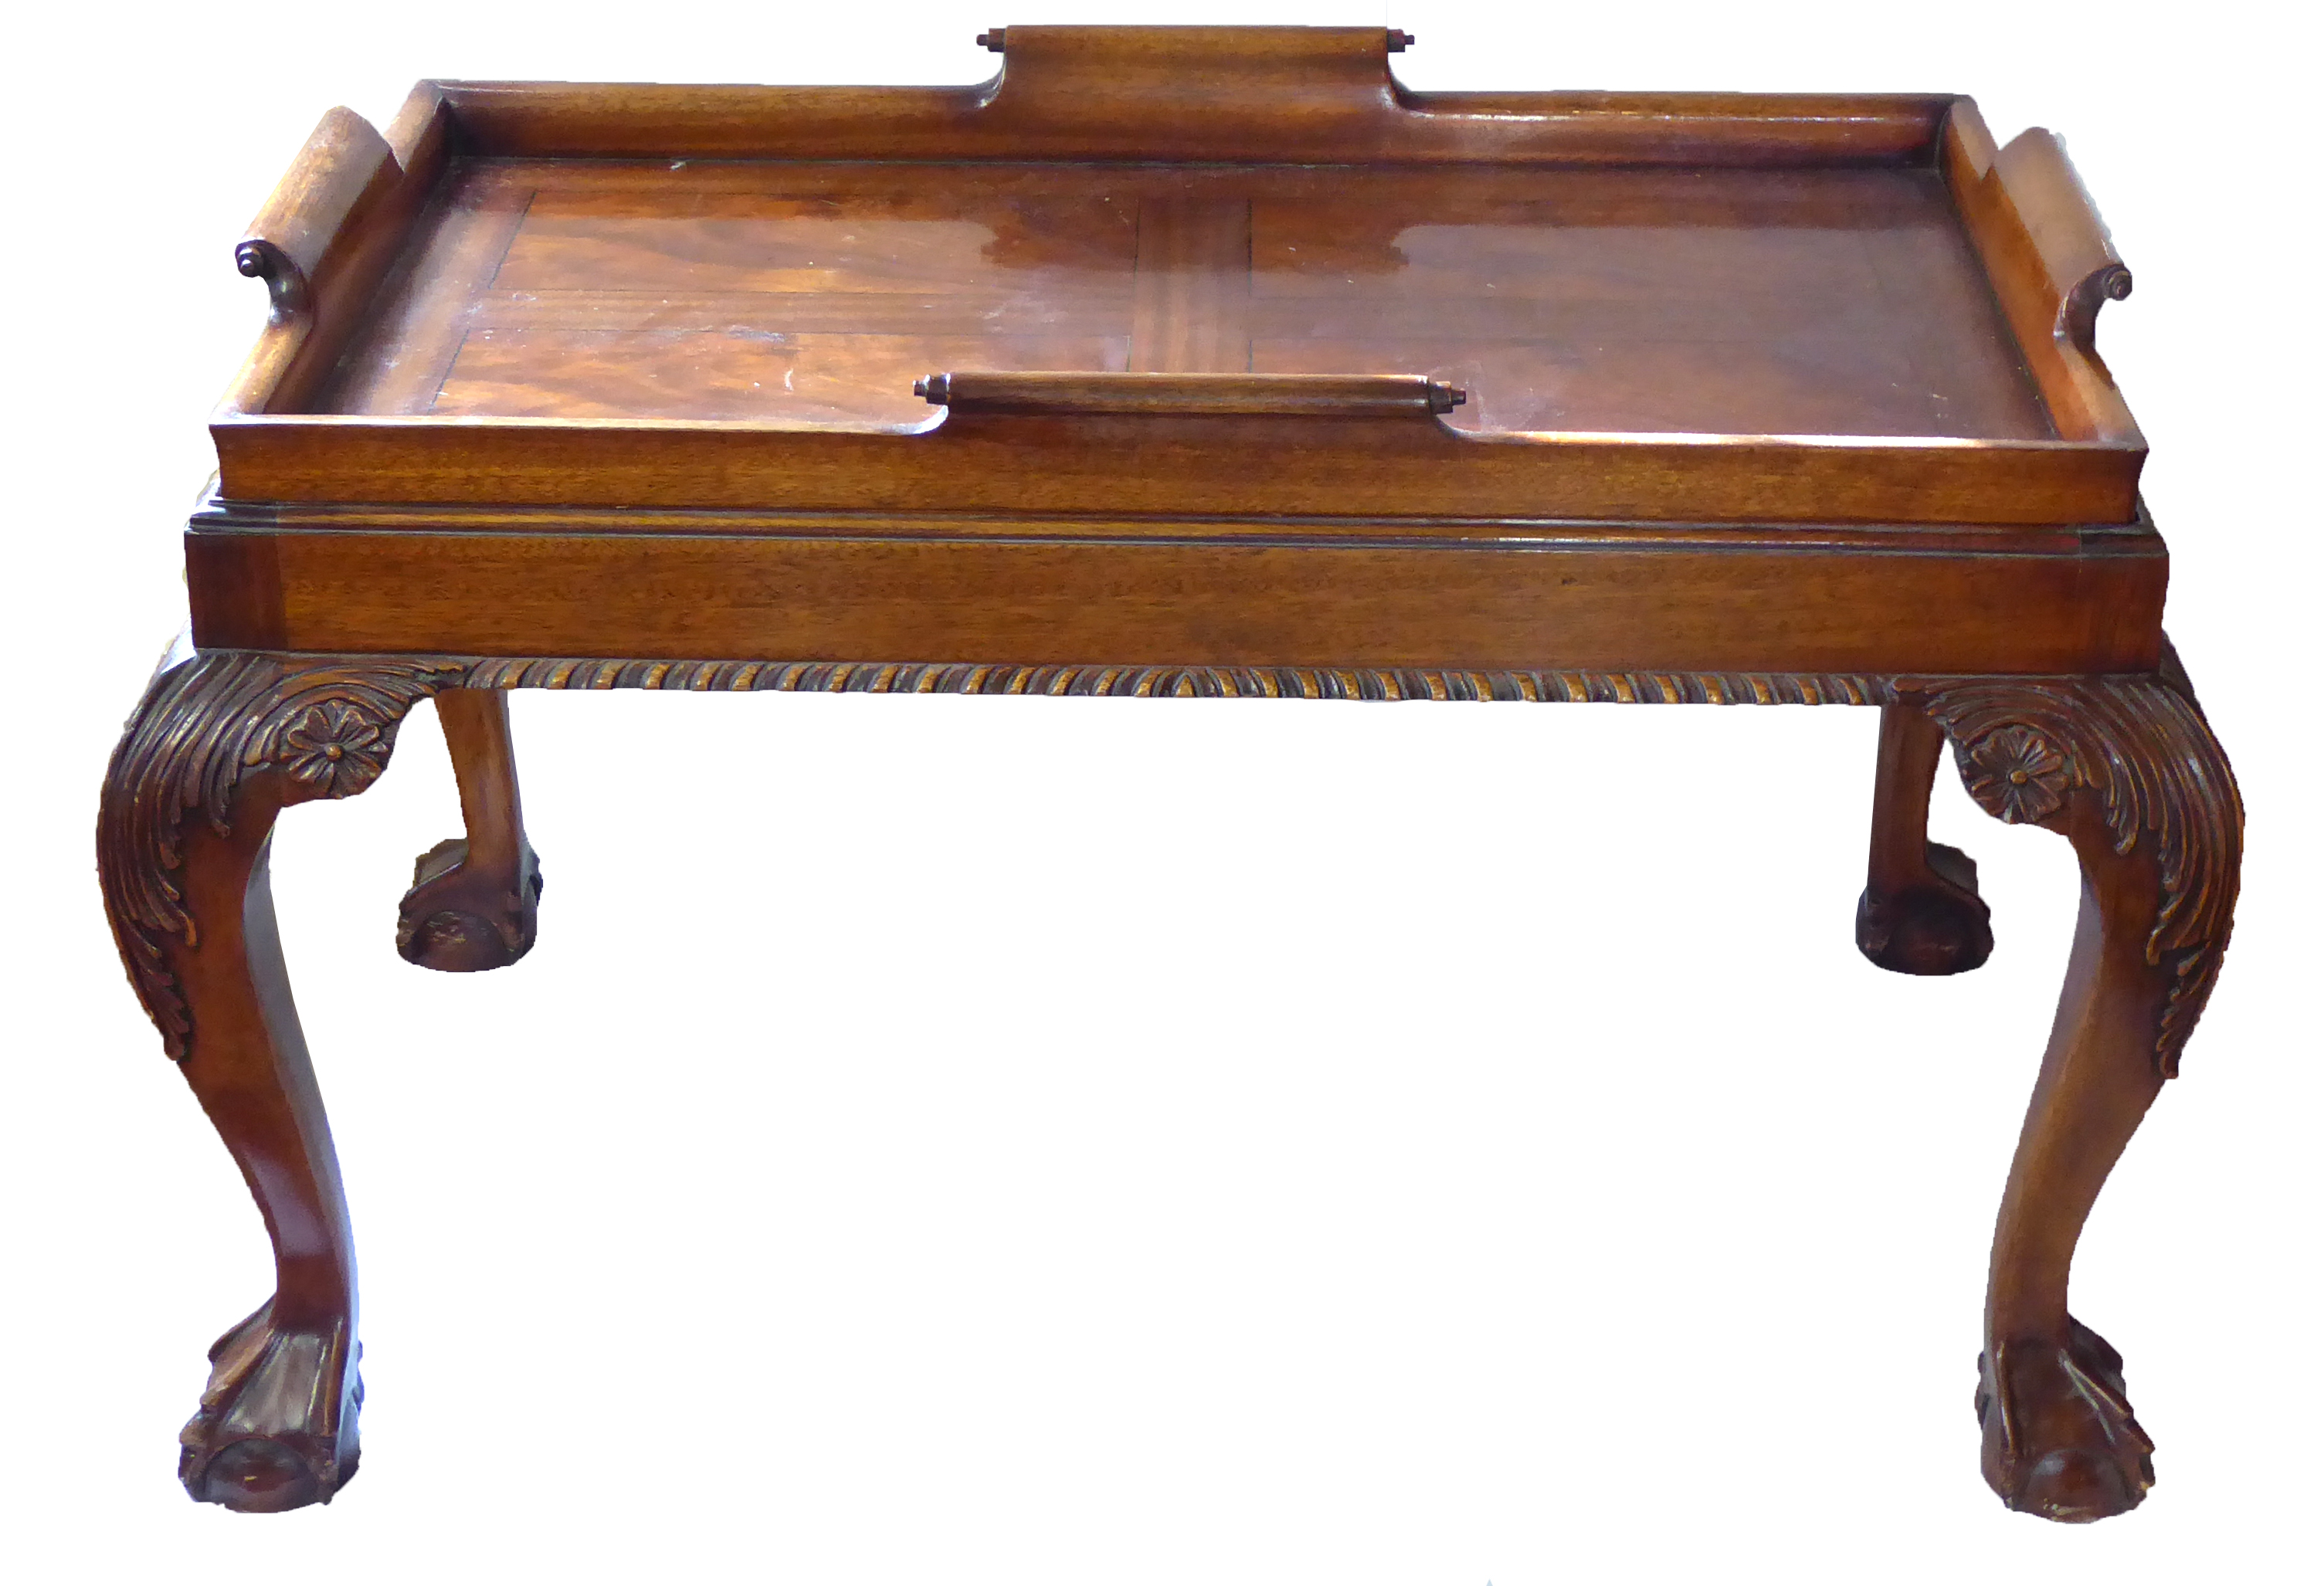 AN 18TH CENTURY DESIGN MAHOGANY TRAY TABLE With four scroll handles, raised on cabriole legs